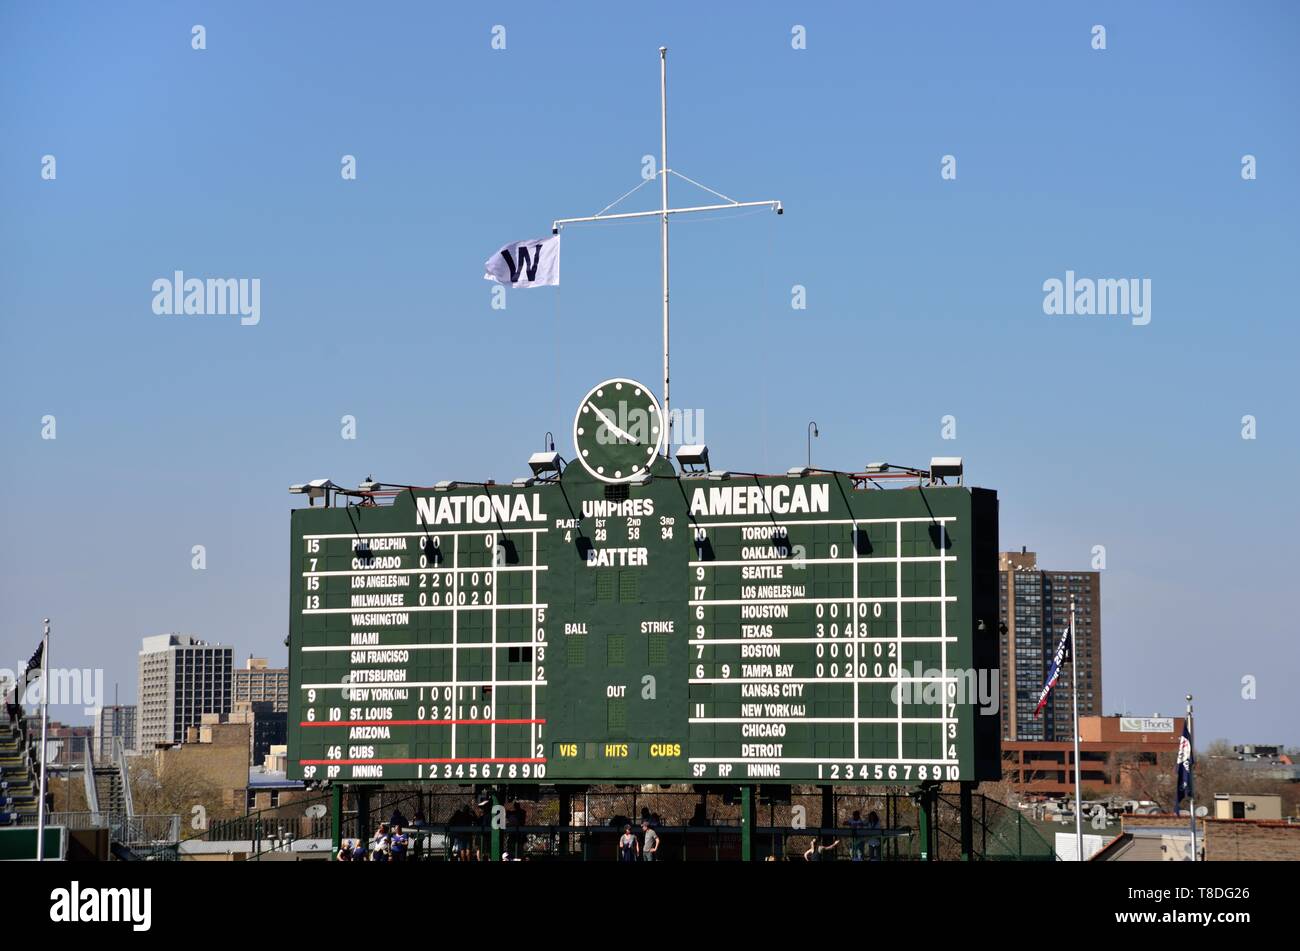 Chicago Cubs: History of Wrigley Field's 'W' flag